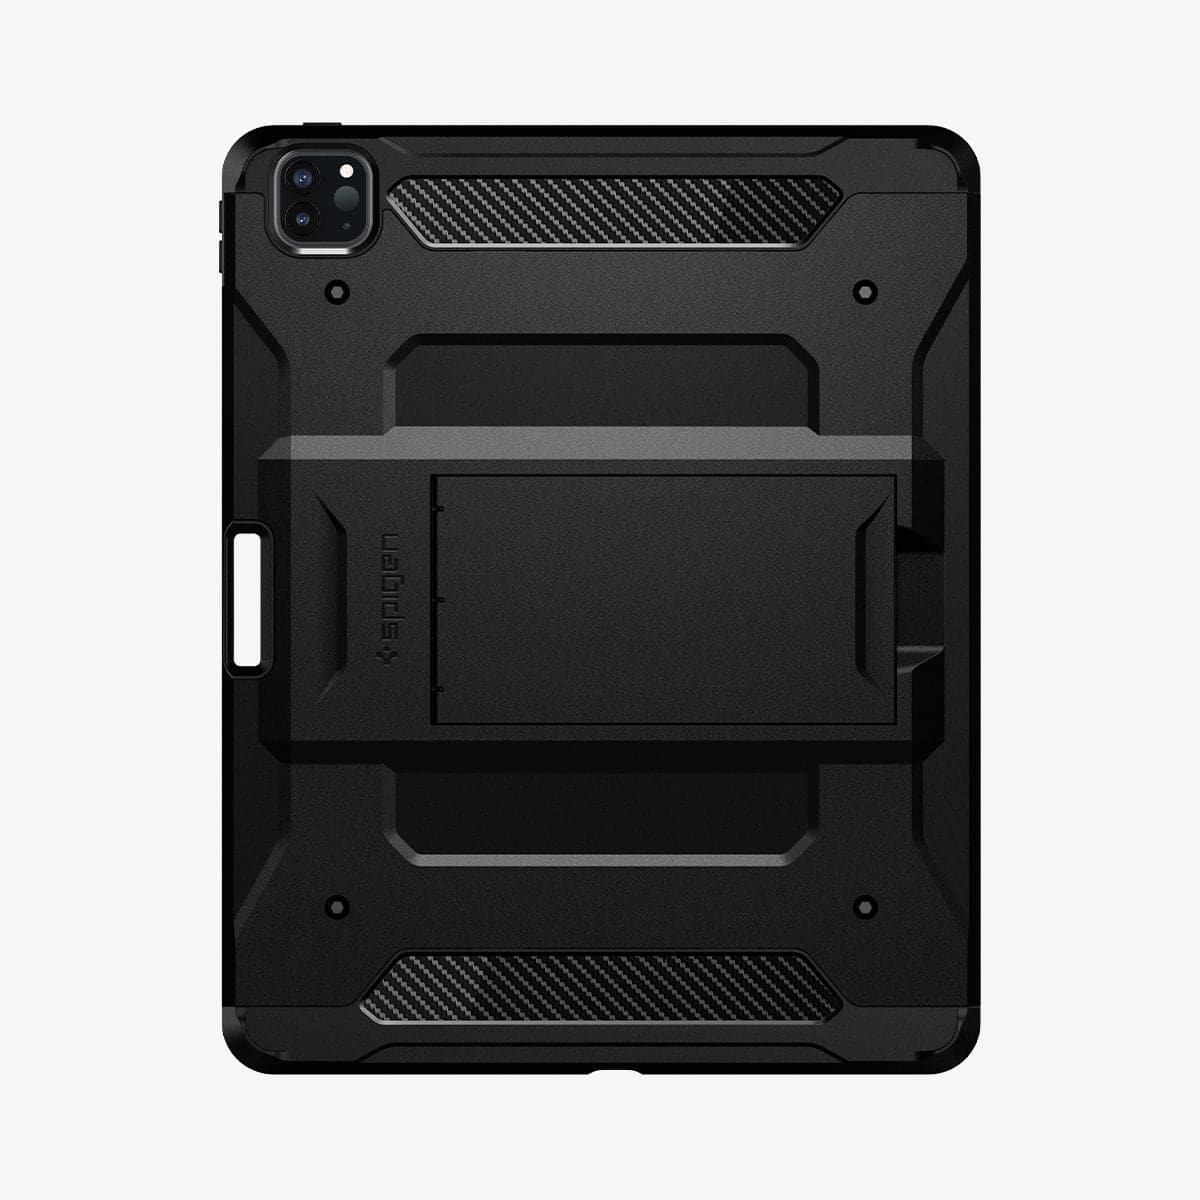 ACS02881 - iPad Pro 12.9" Case Tough Armor Pro in black showing the back